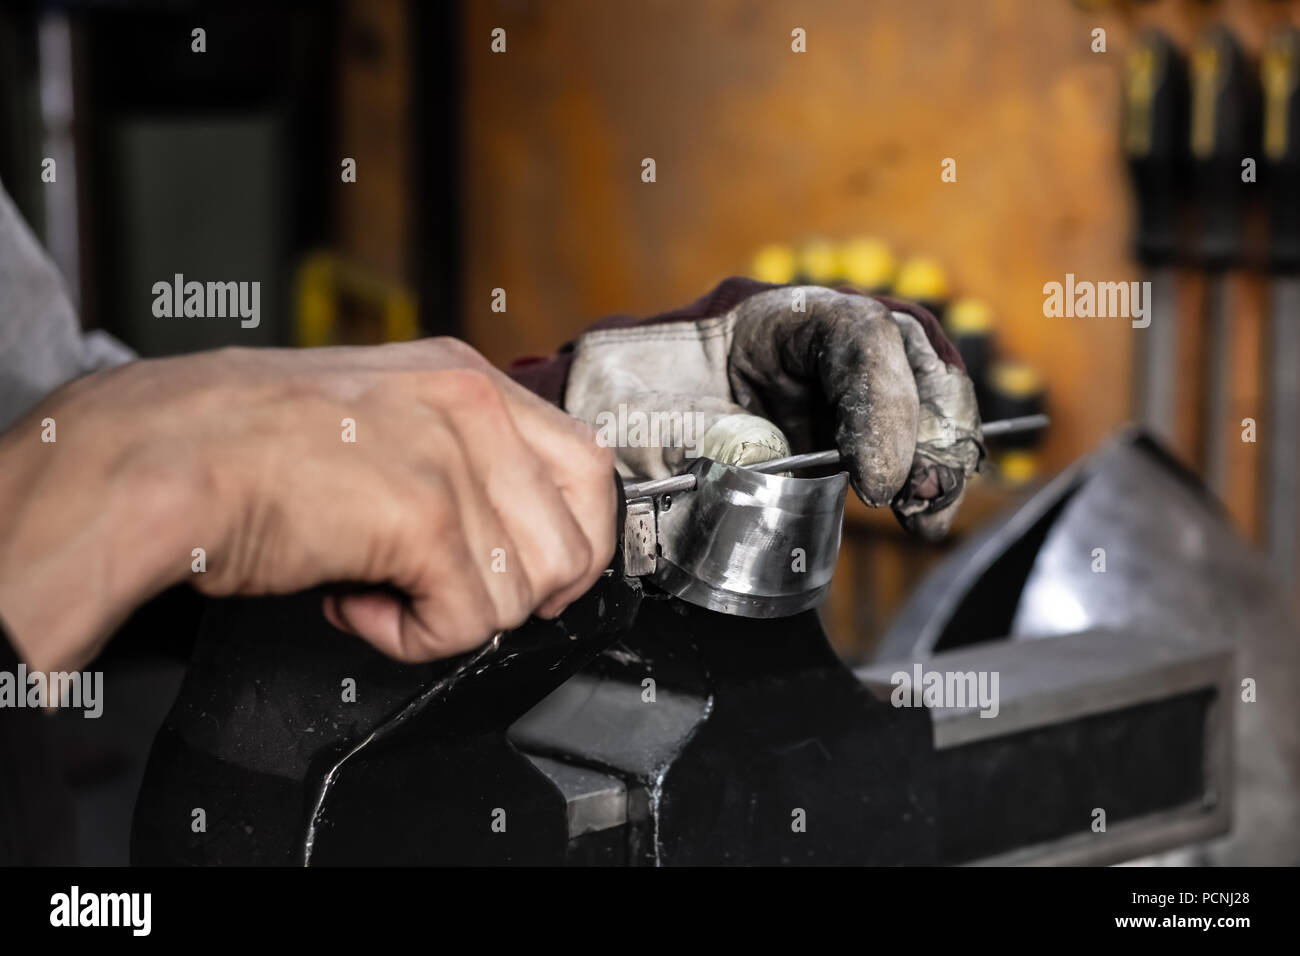 Male metal worker constructing or repairing piece of metal assembly. Man hands working with metal parts in a workshop Stock Photo